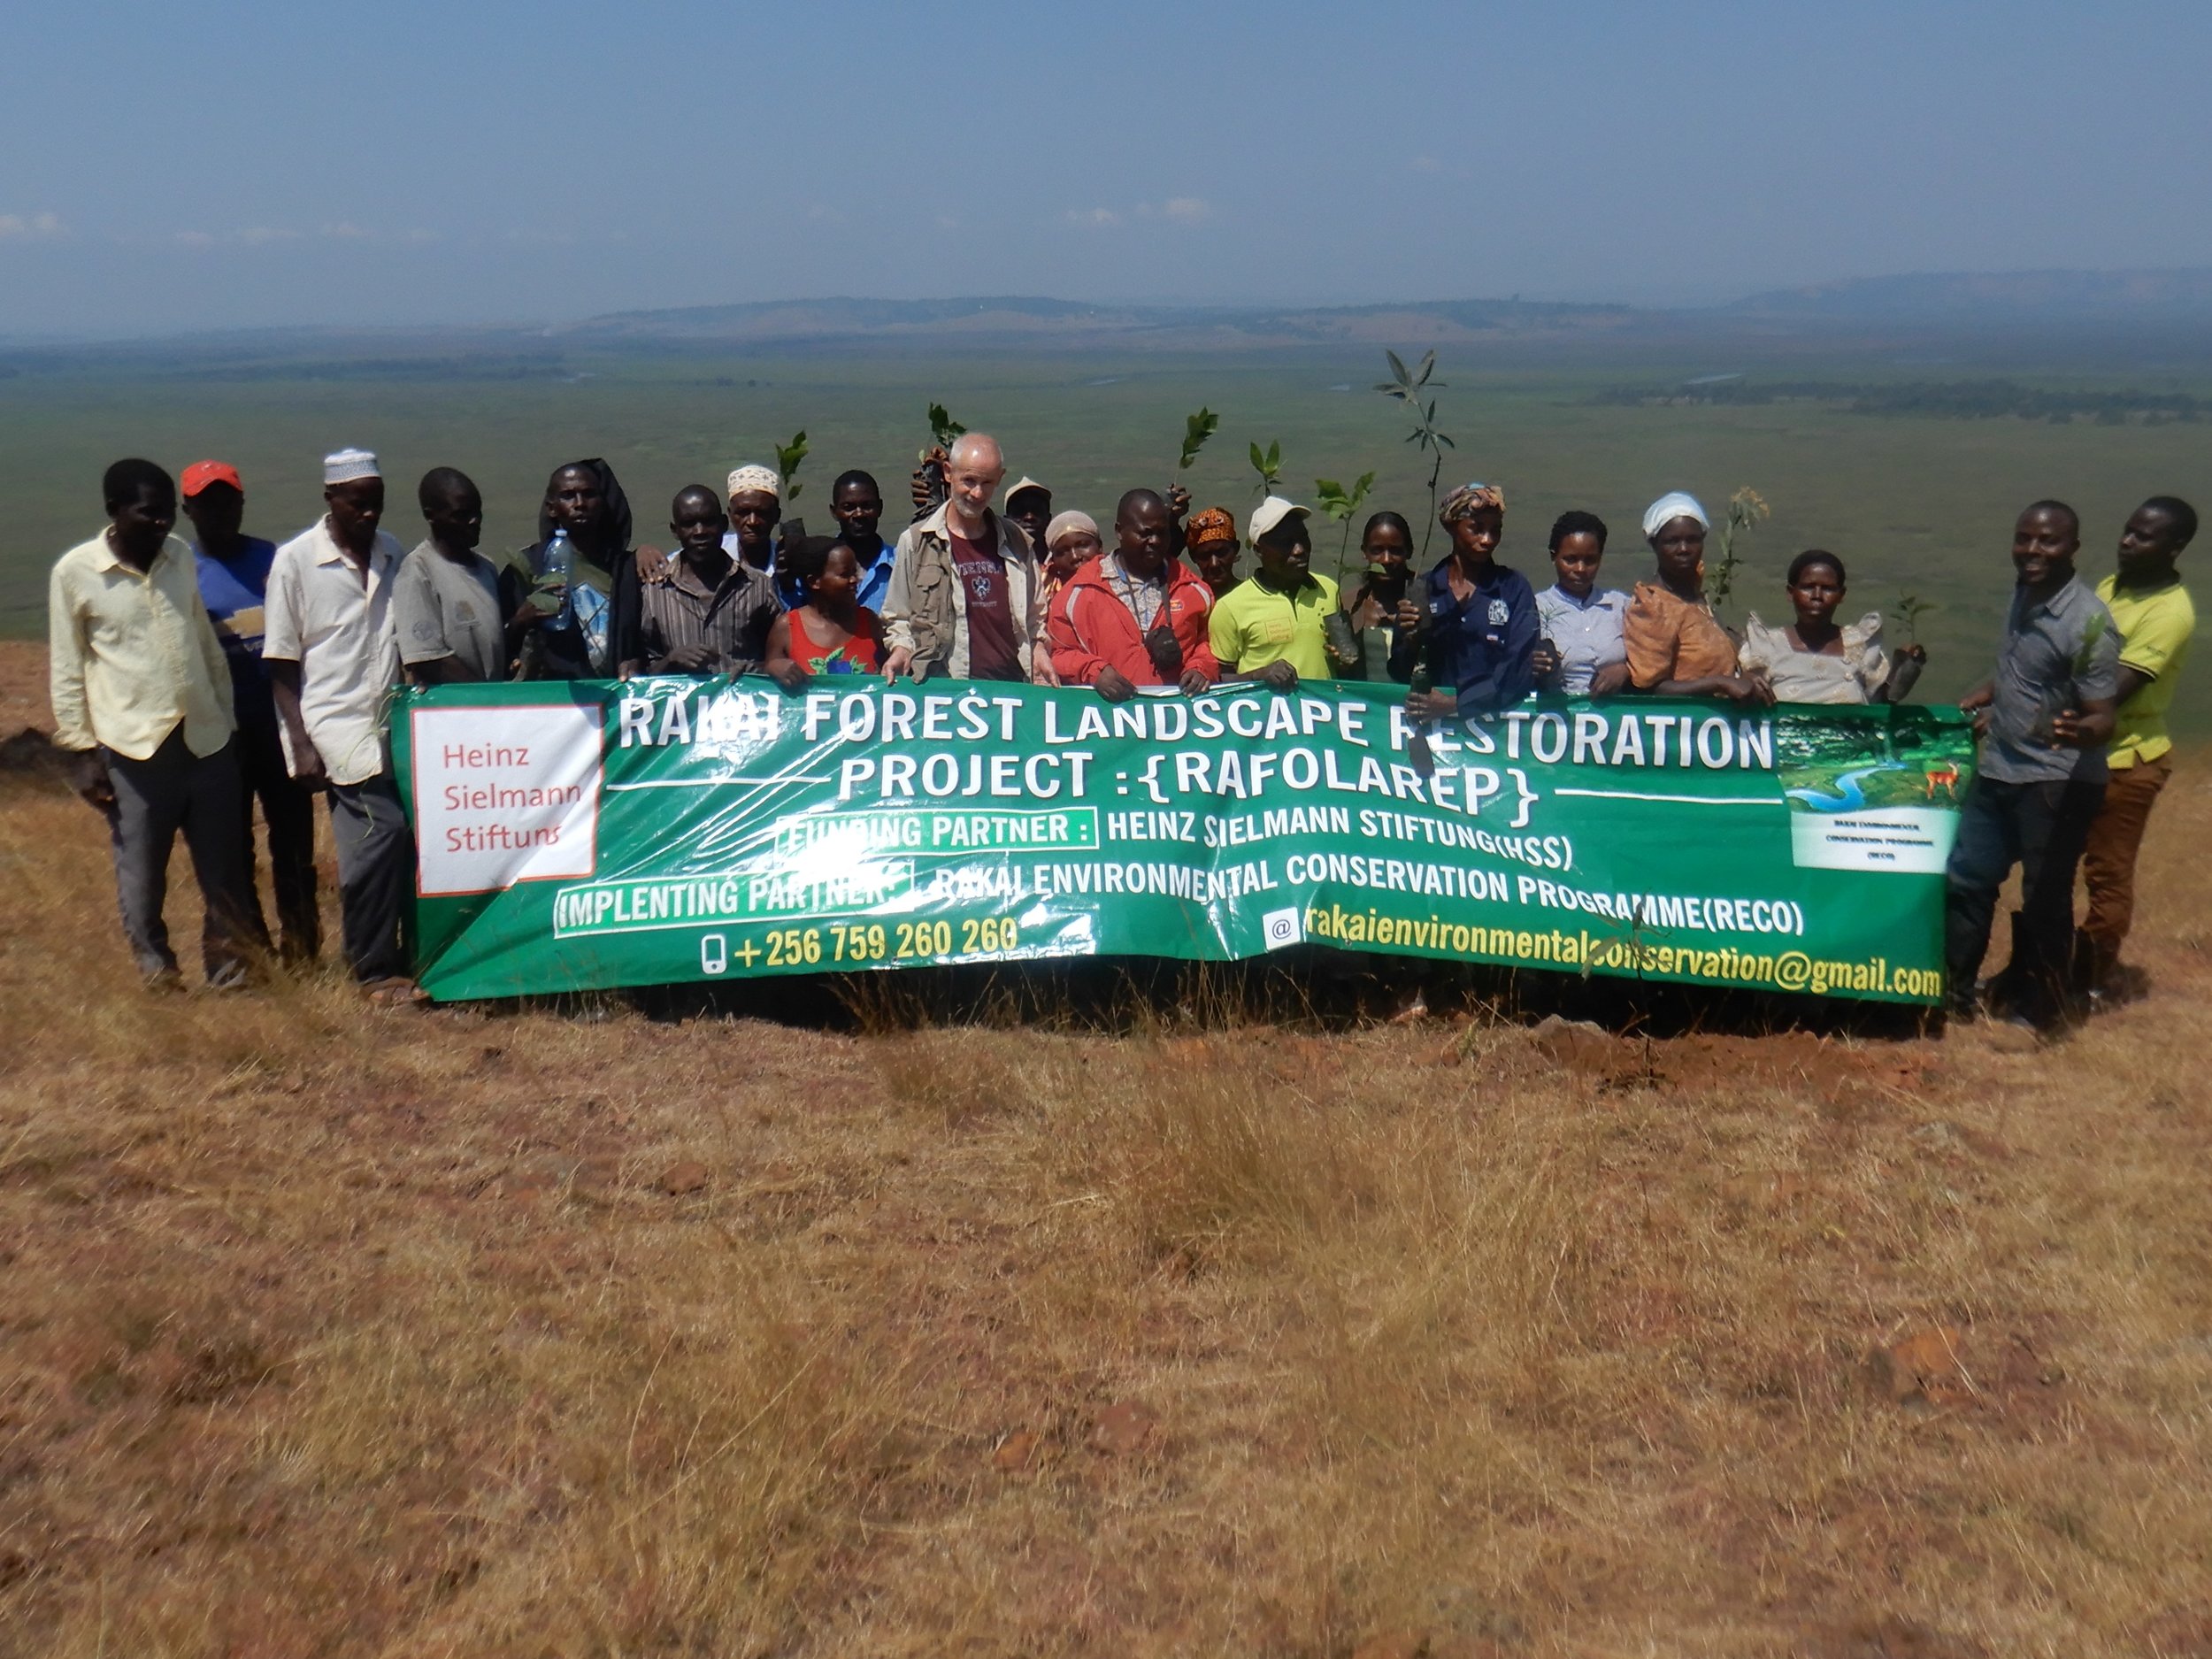  This is a group photo with our one of our local community groups I work with to restore the degraded lands. 